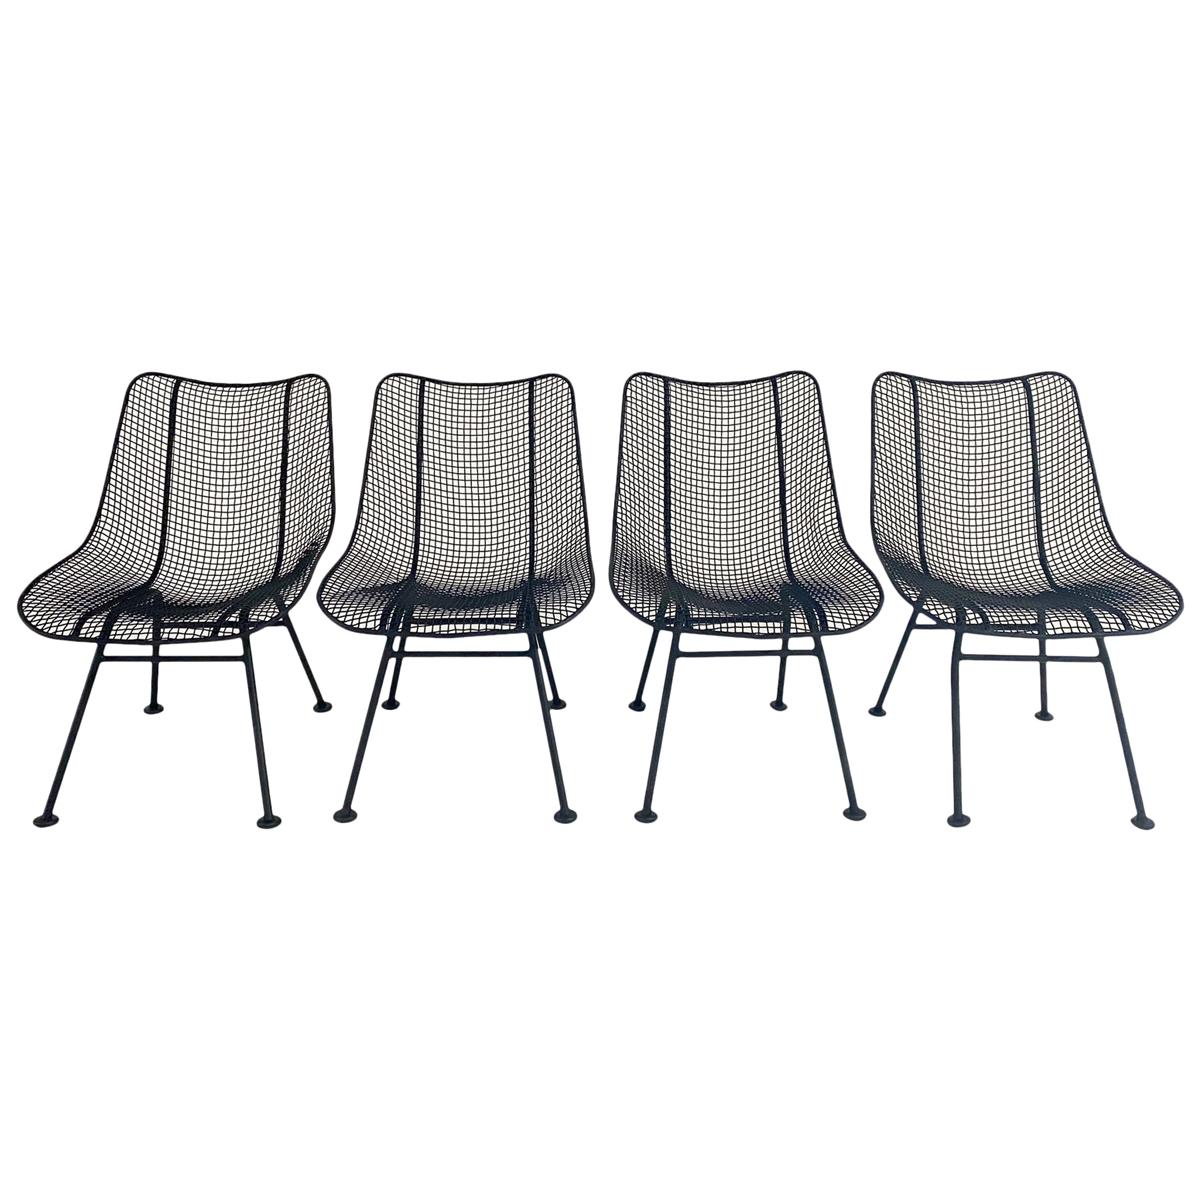 Russell Woodard Sculptura Dining Chairs Freshly Powder Coated, Set of 4